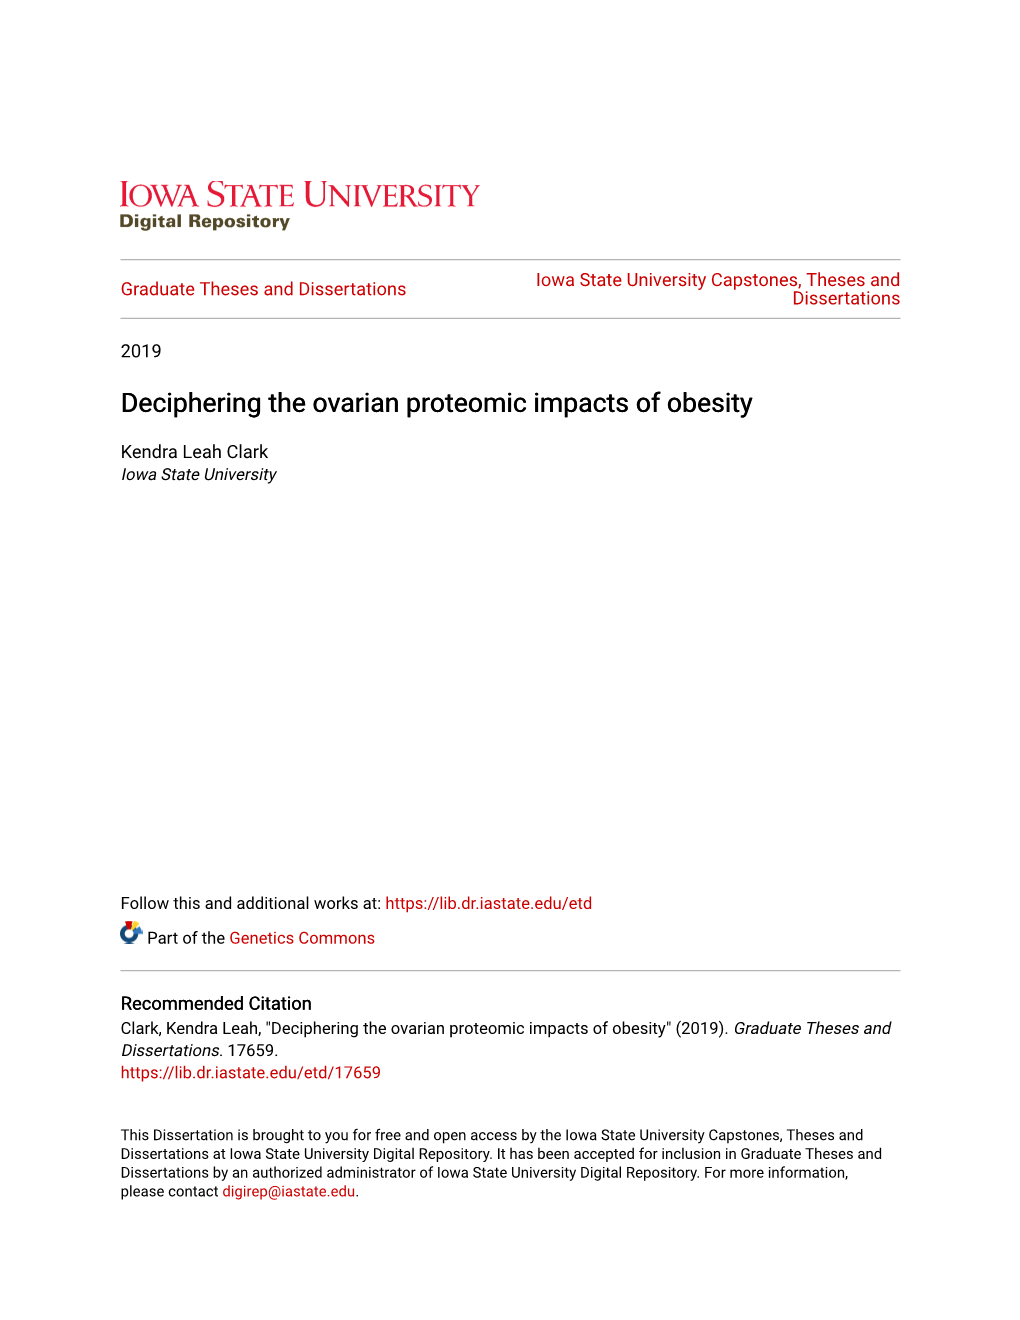 Deciphering the Ovarian Proteomic Impacts of Obesity